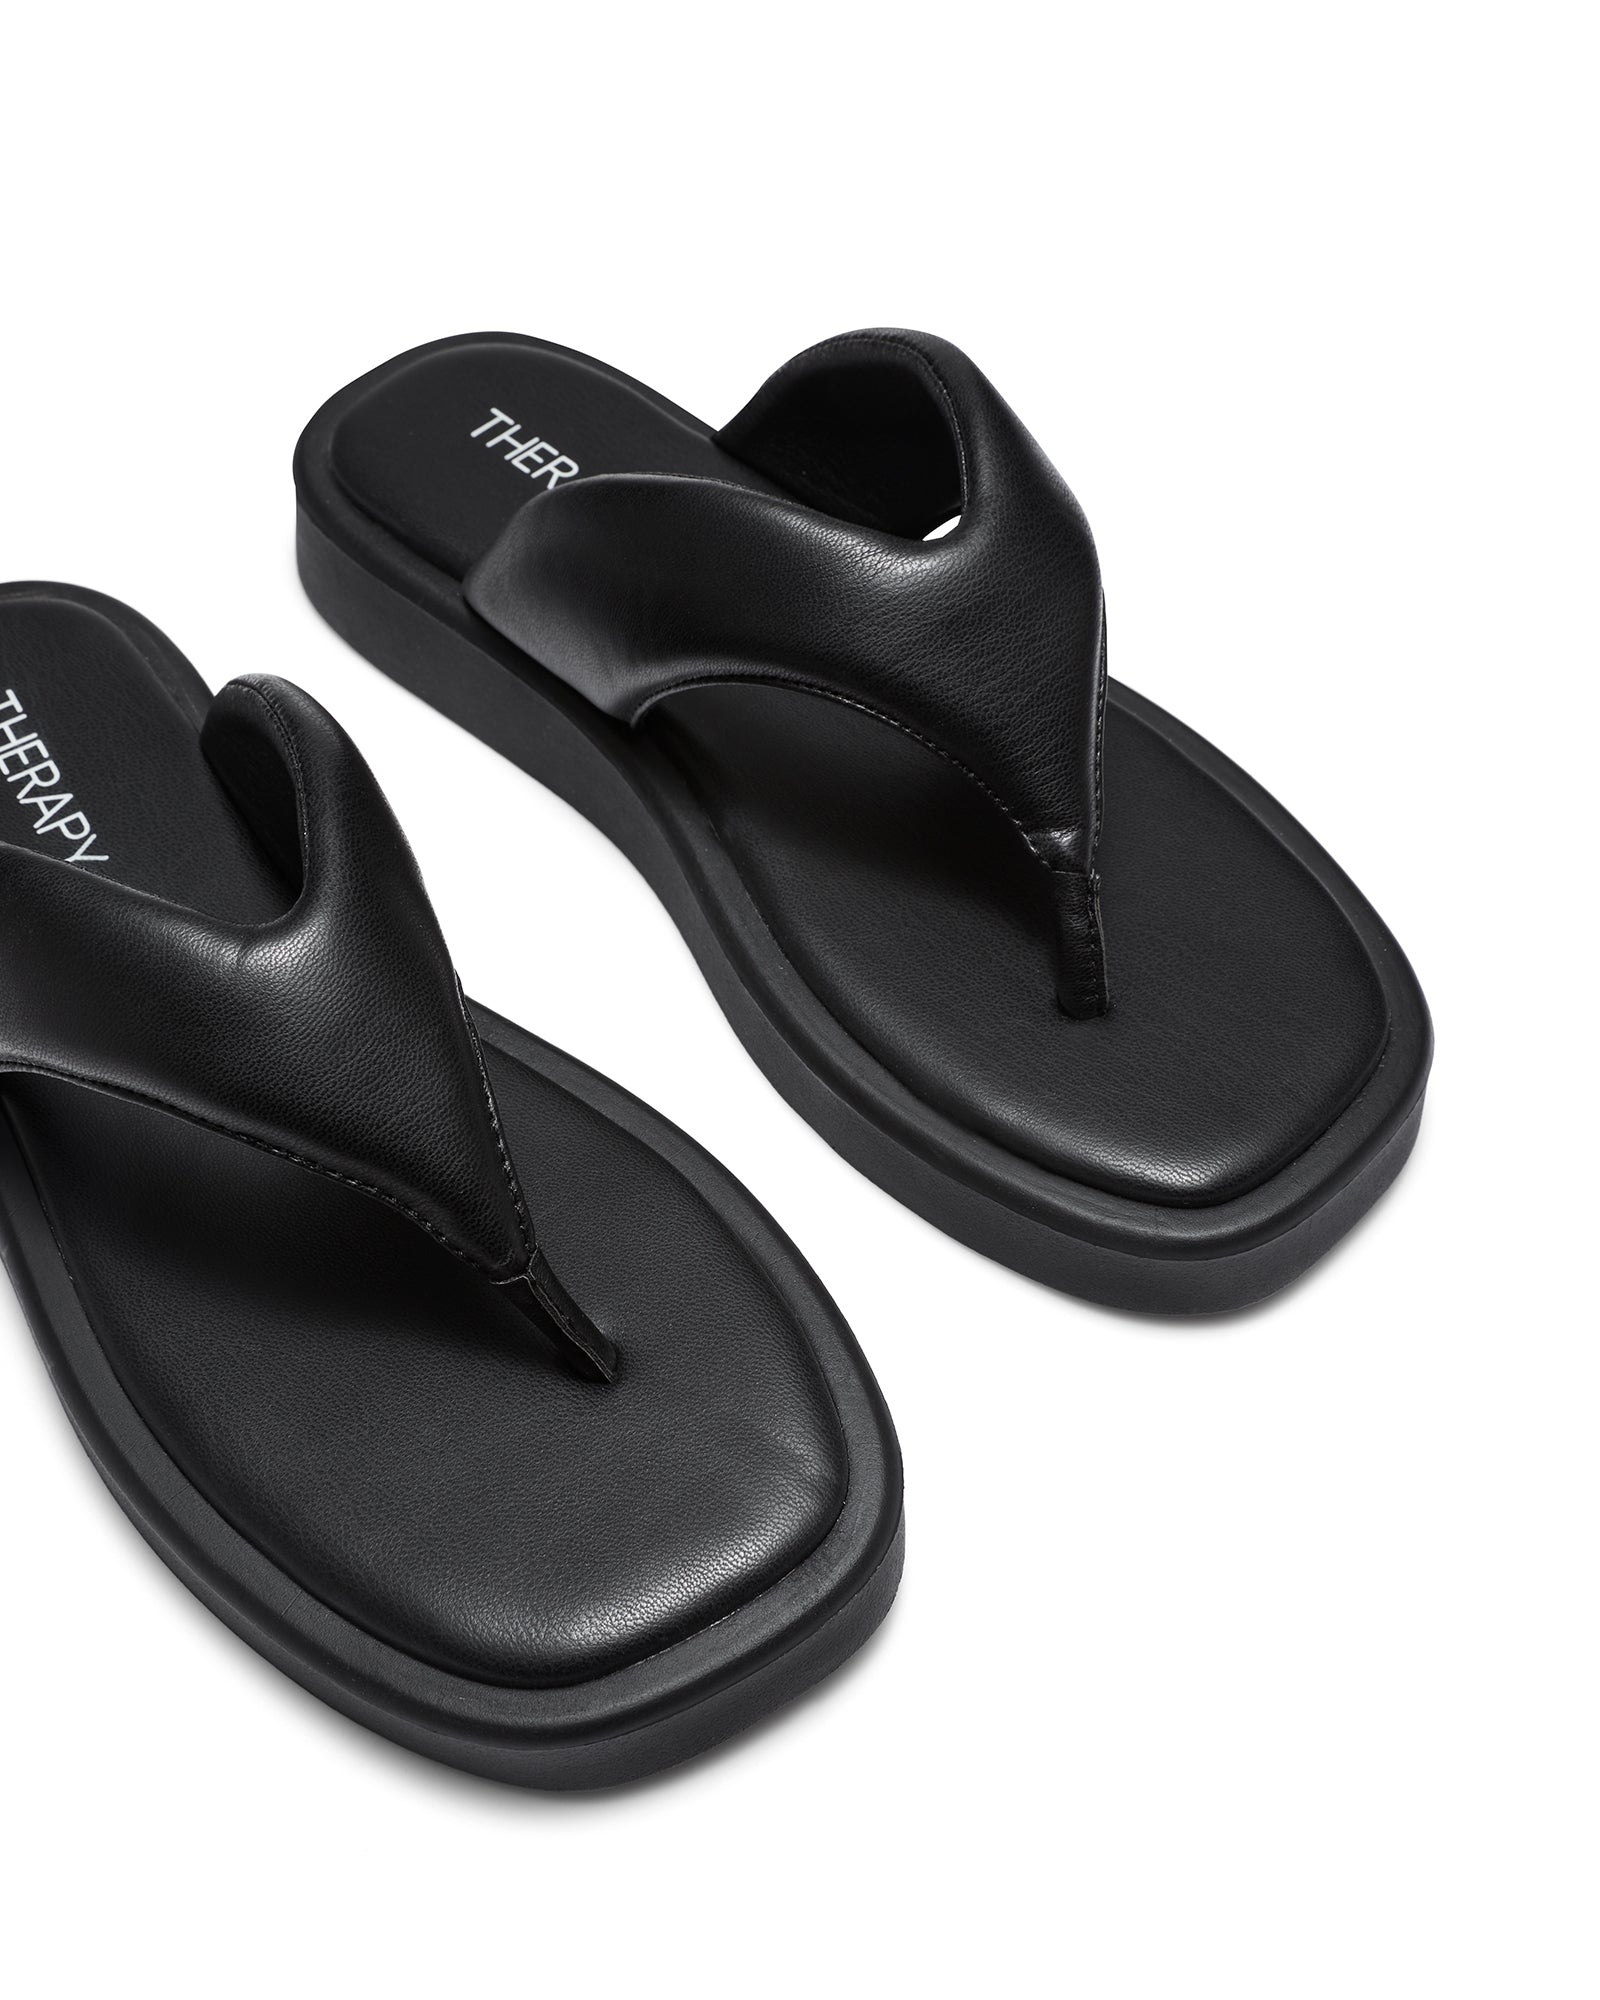 Therapy Shoes Pace Black | Women's Sandals | Slides | Thong | Flatform